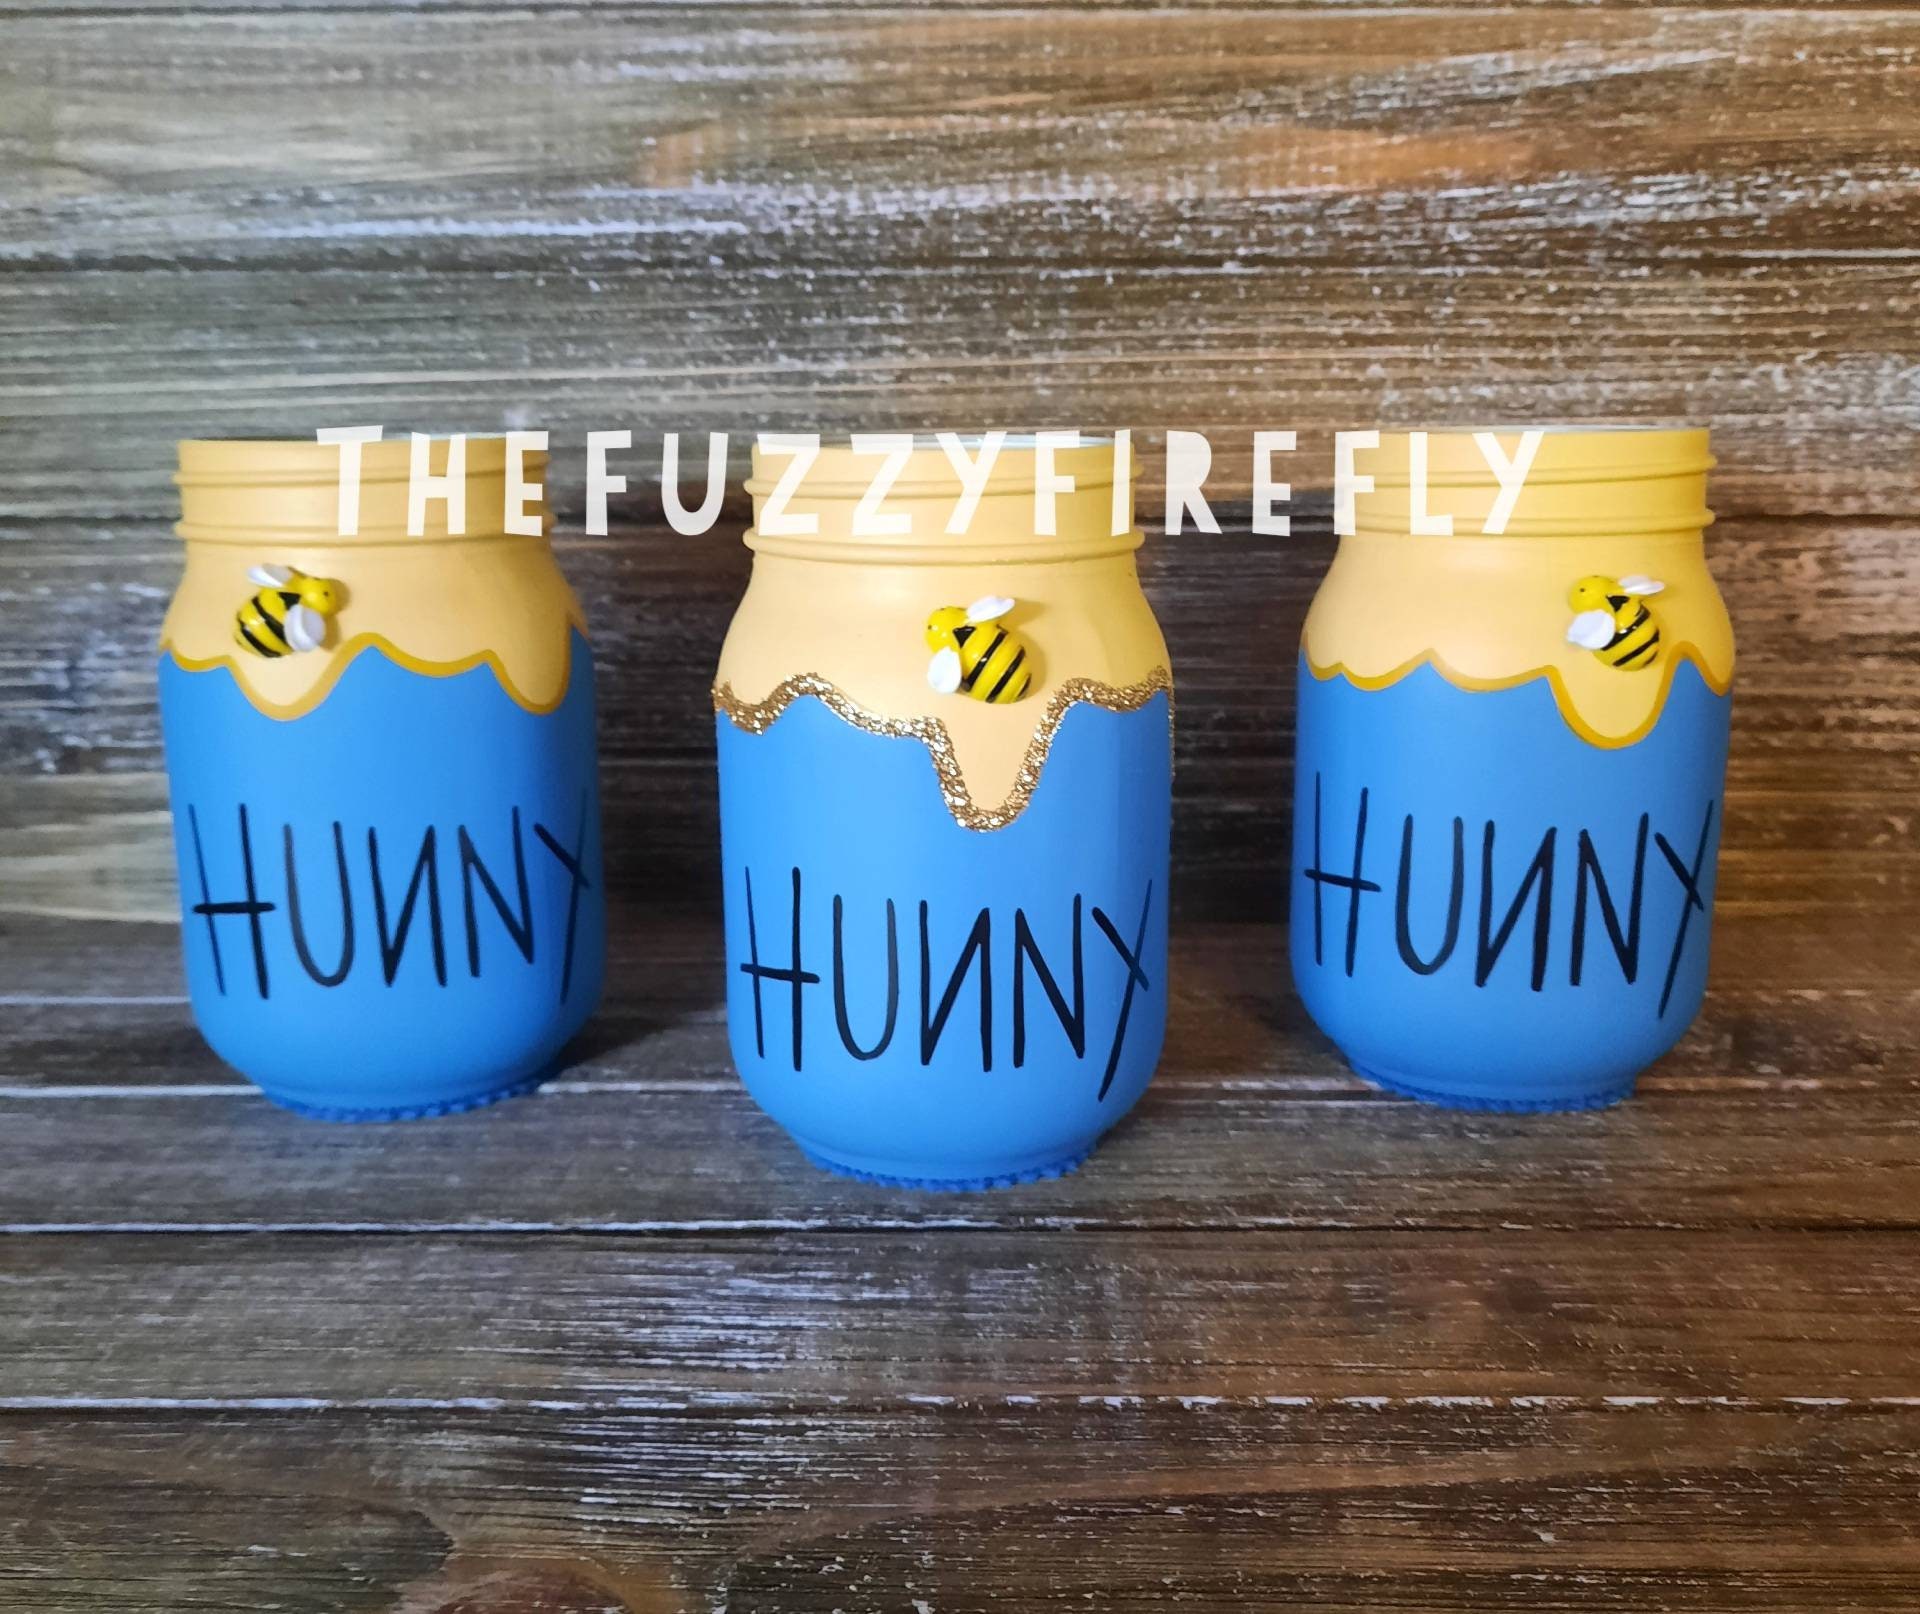 Winnie The Pooh Hunny Pots, Hunny pot designs with Pooh and…